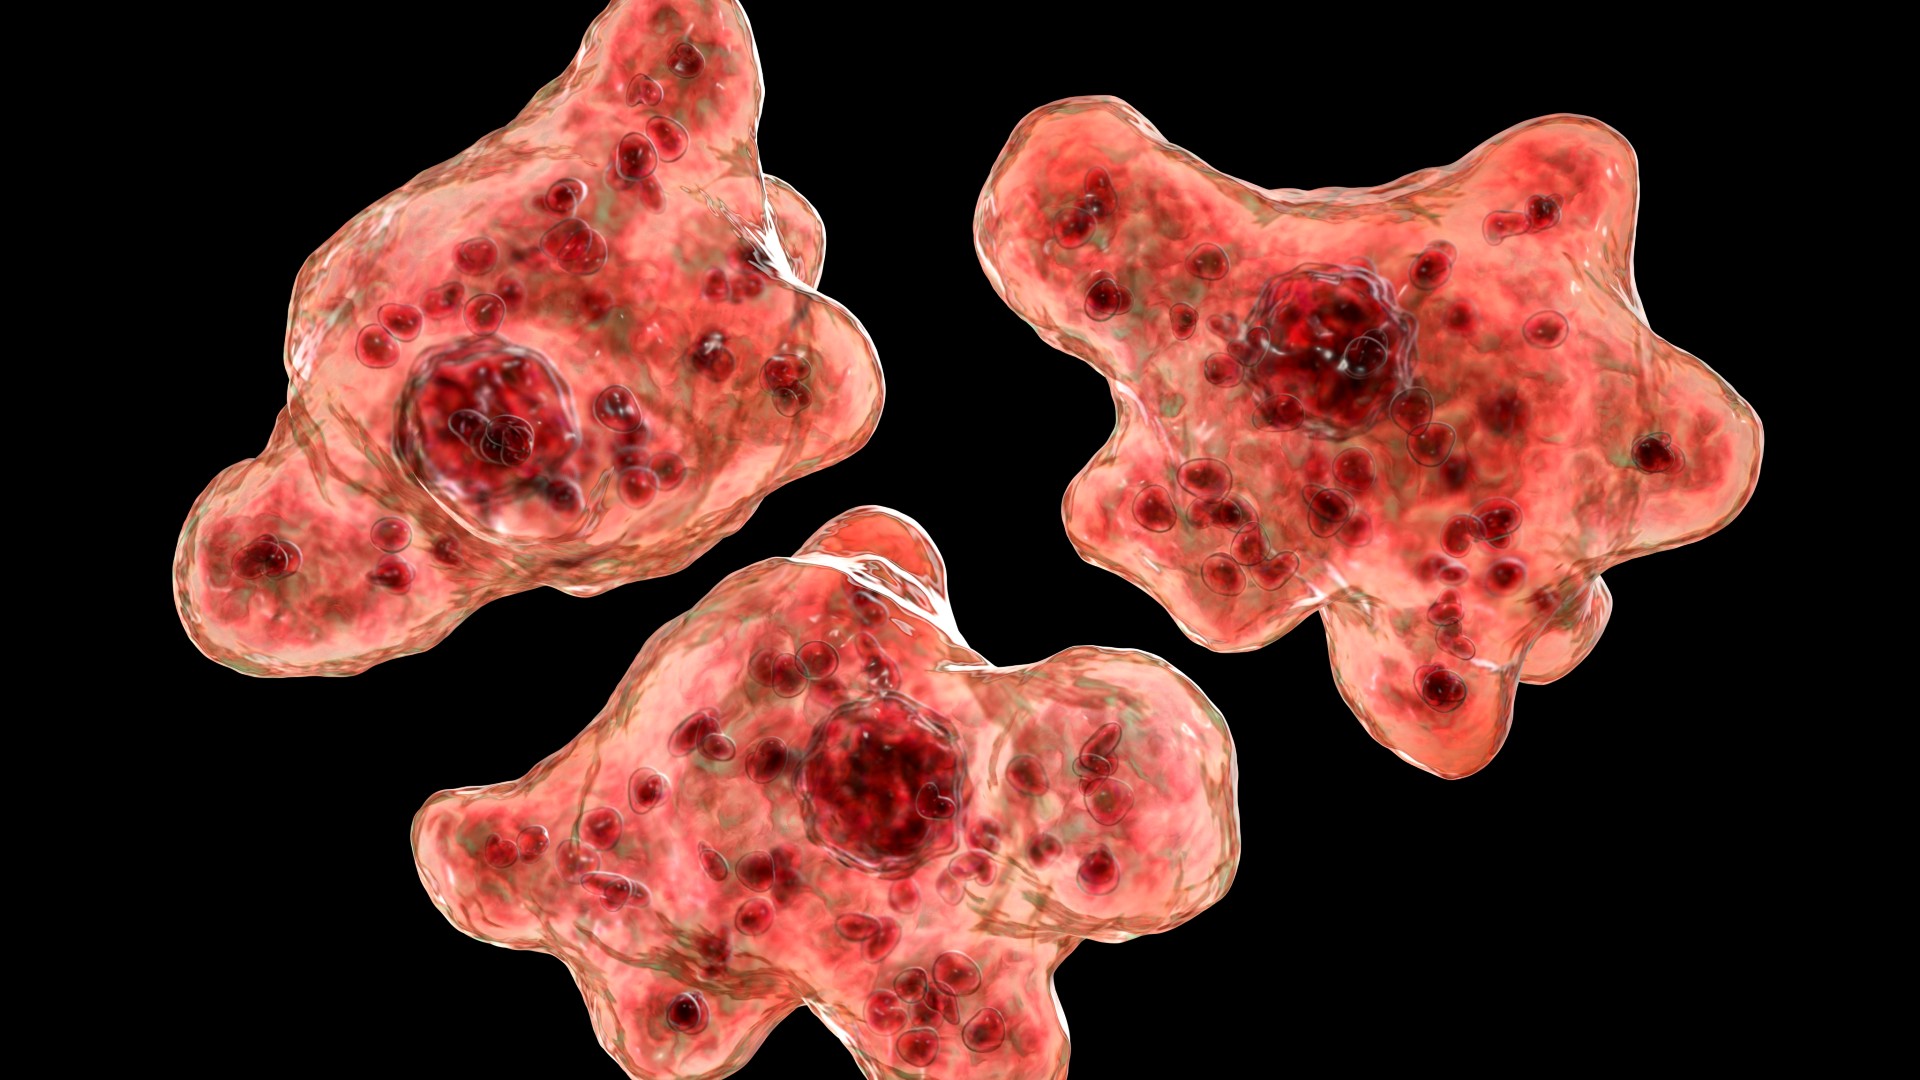 Three red, irregularly-shaped blobs are shown clustered against a black background. Smaller, darker red blobs can be seen within the main blobs.